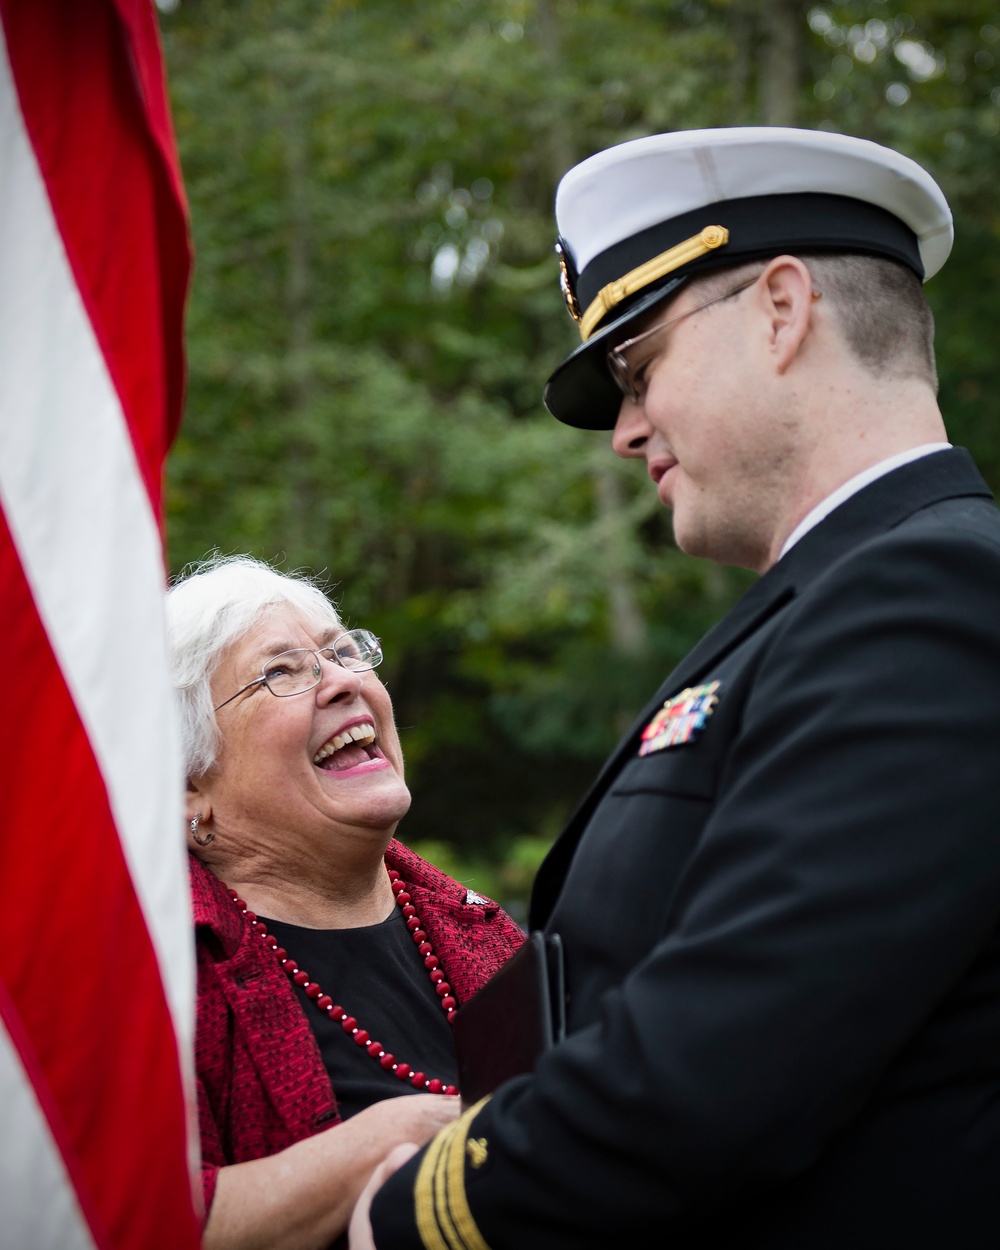 NAVFAC NW Seabees Honor Marvin Shields